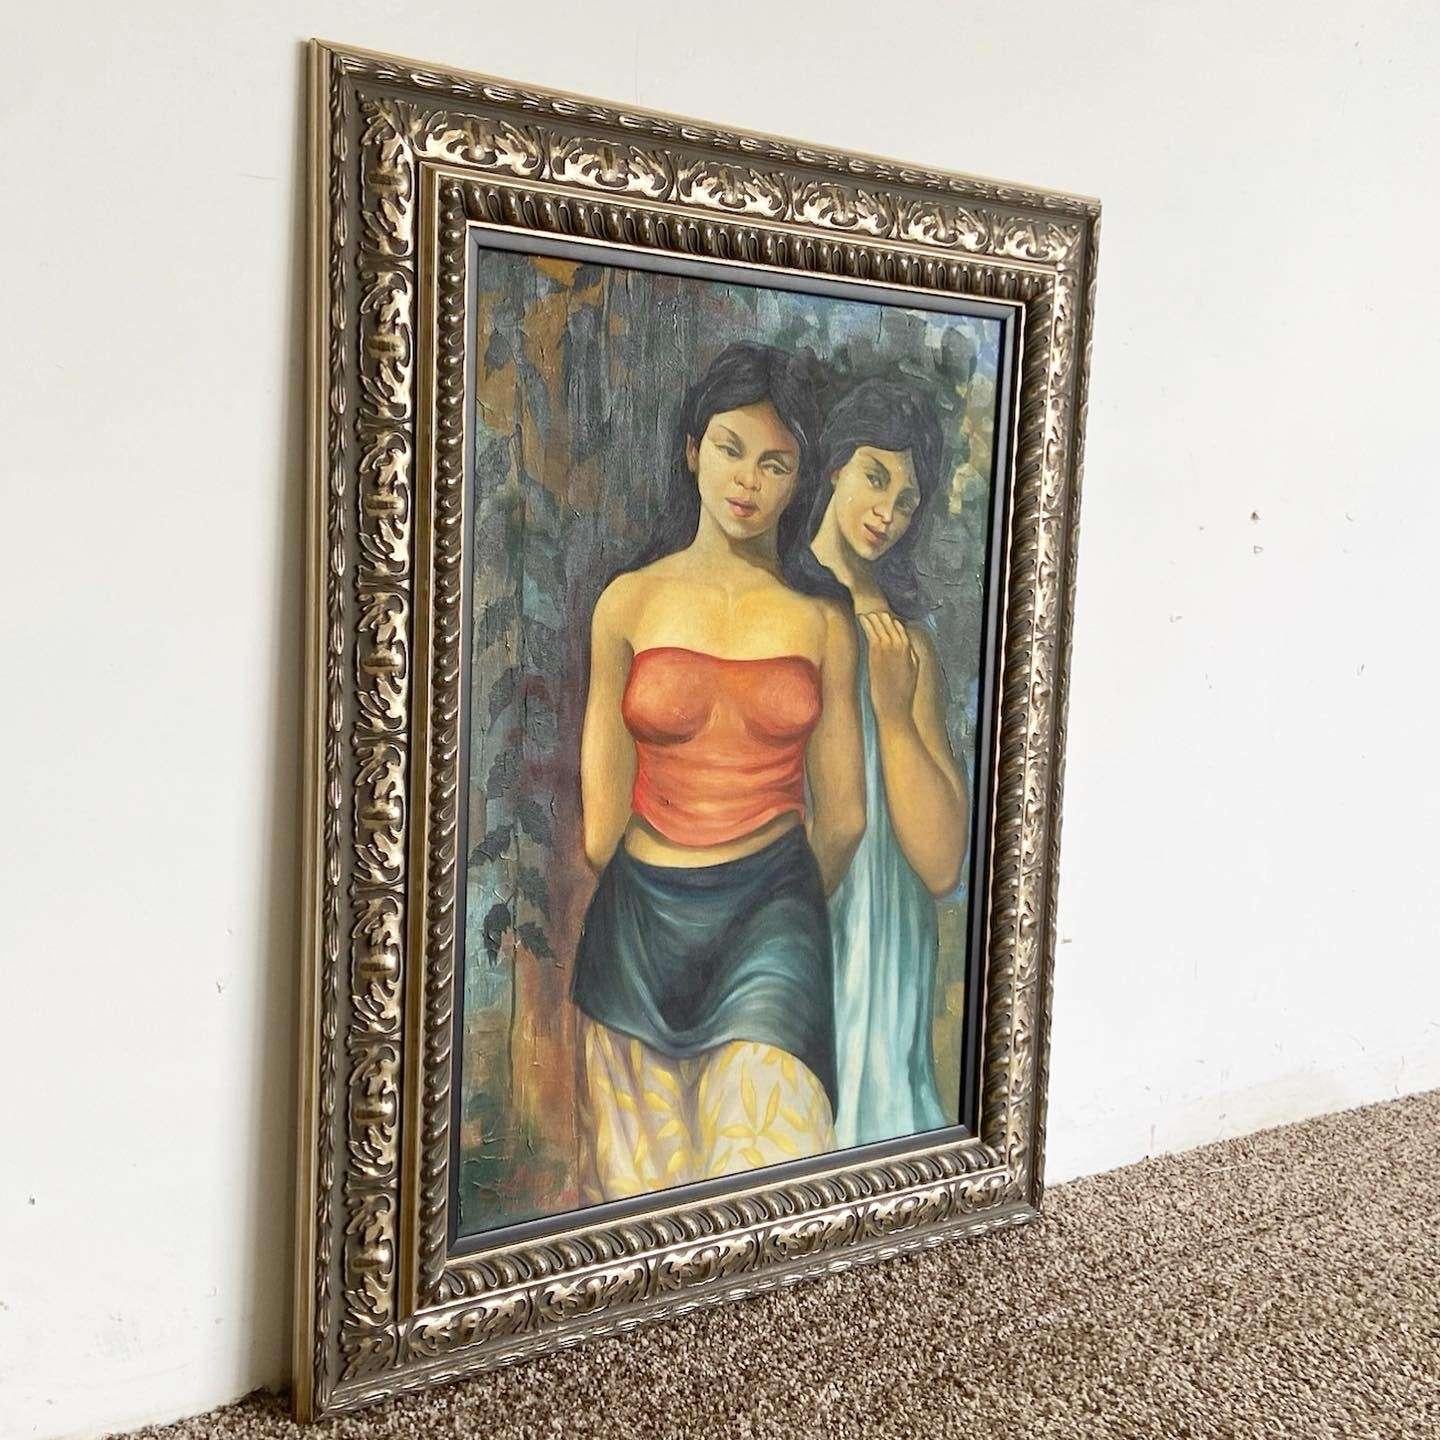 Excellent vintage hand painted, signed and framed painting. Subject is of two young women.
